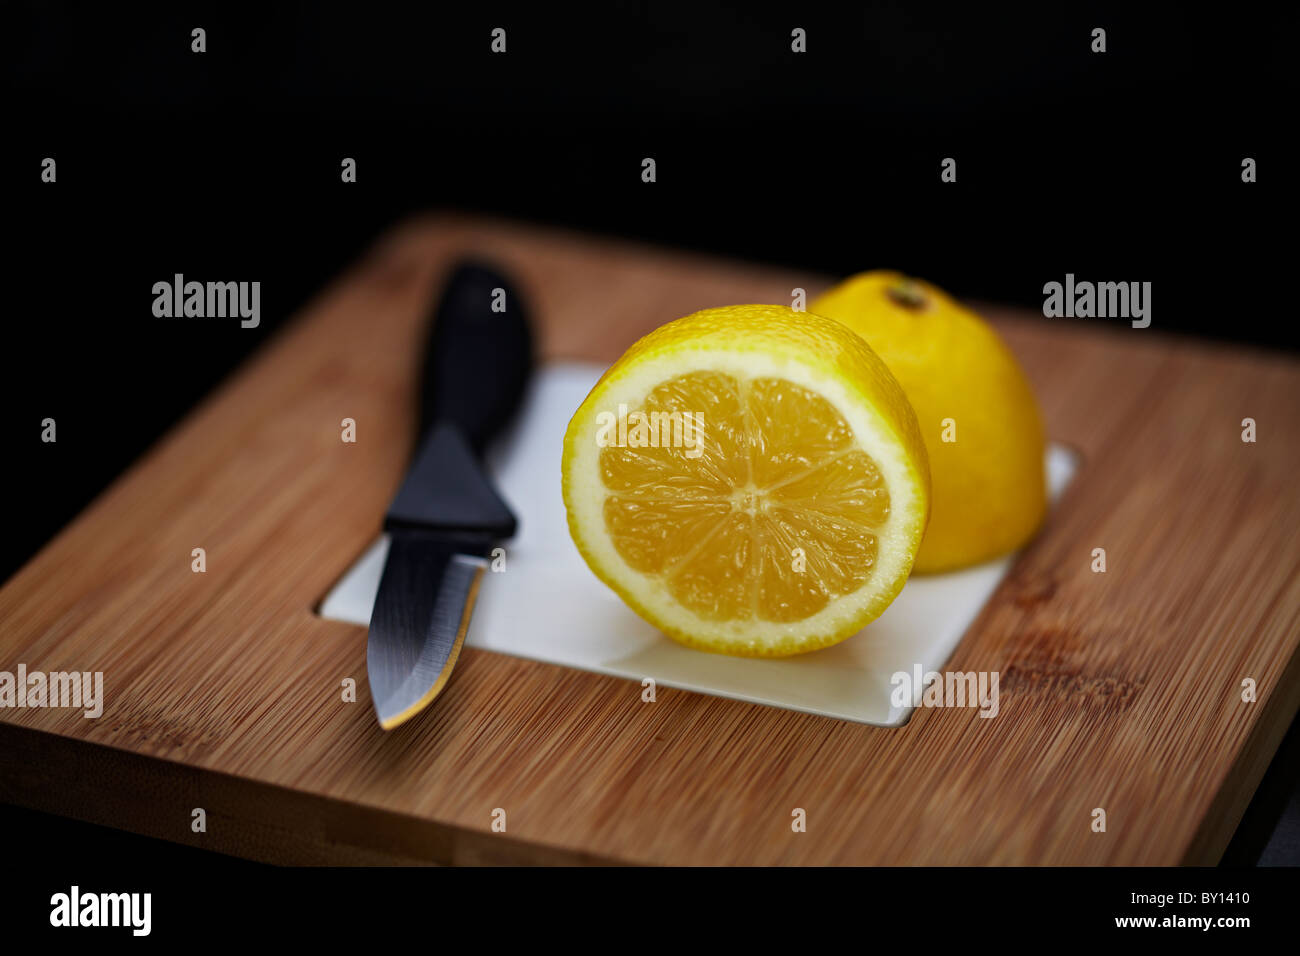 Citrus fruit (lemons and limes) on a bamboo wooden chopping board Stock Photo